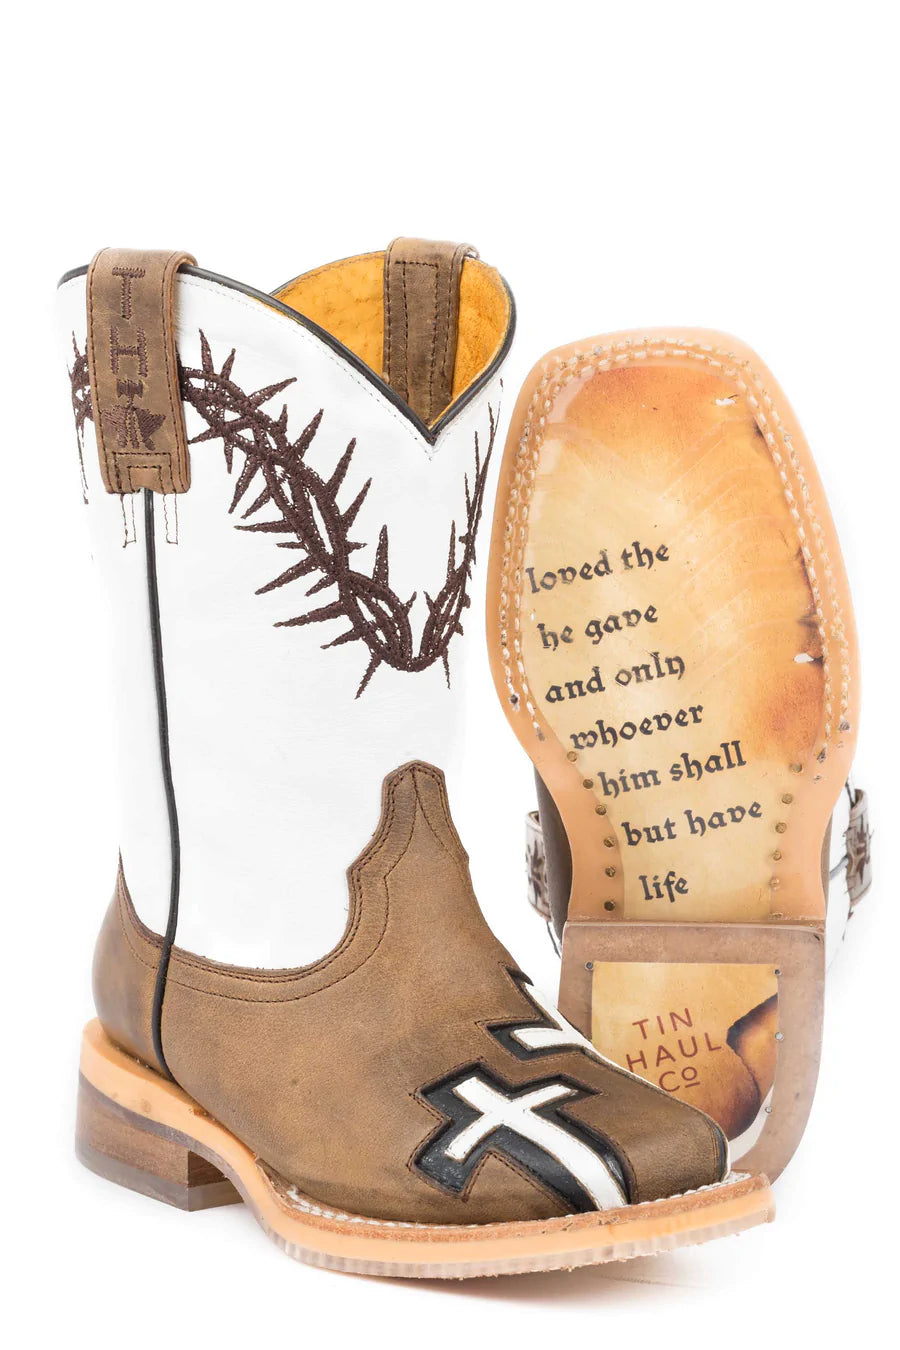 Tin Haul Kid’s Crosses Boot With John 3:16 Sole - Nate's Western Wear